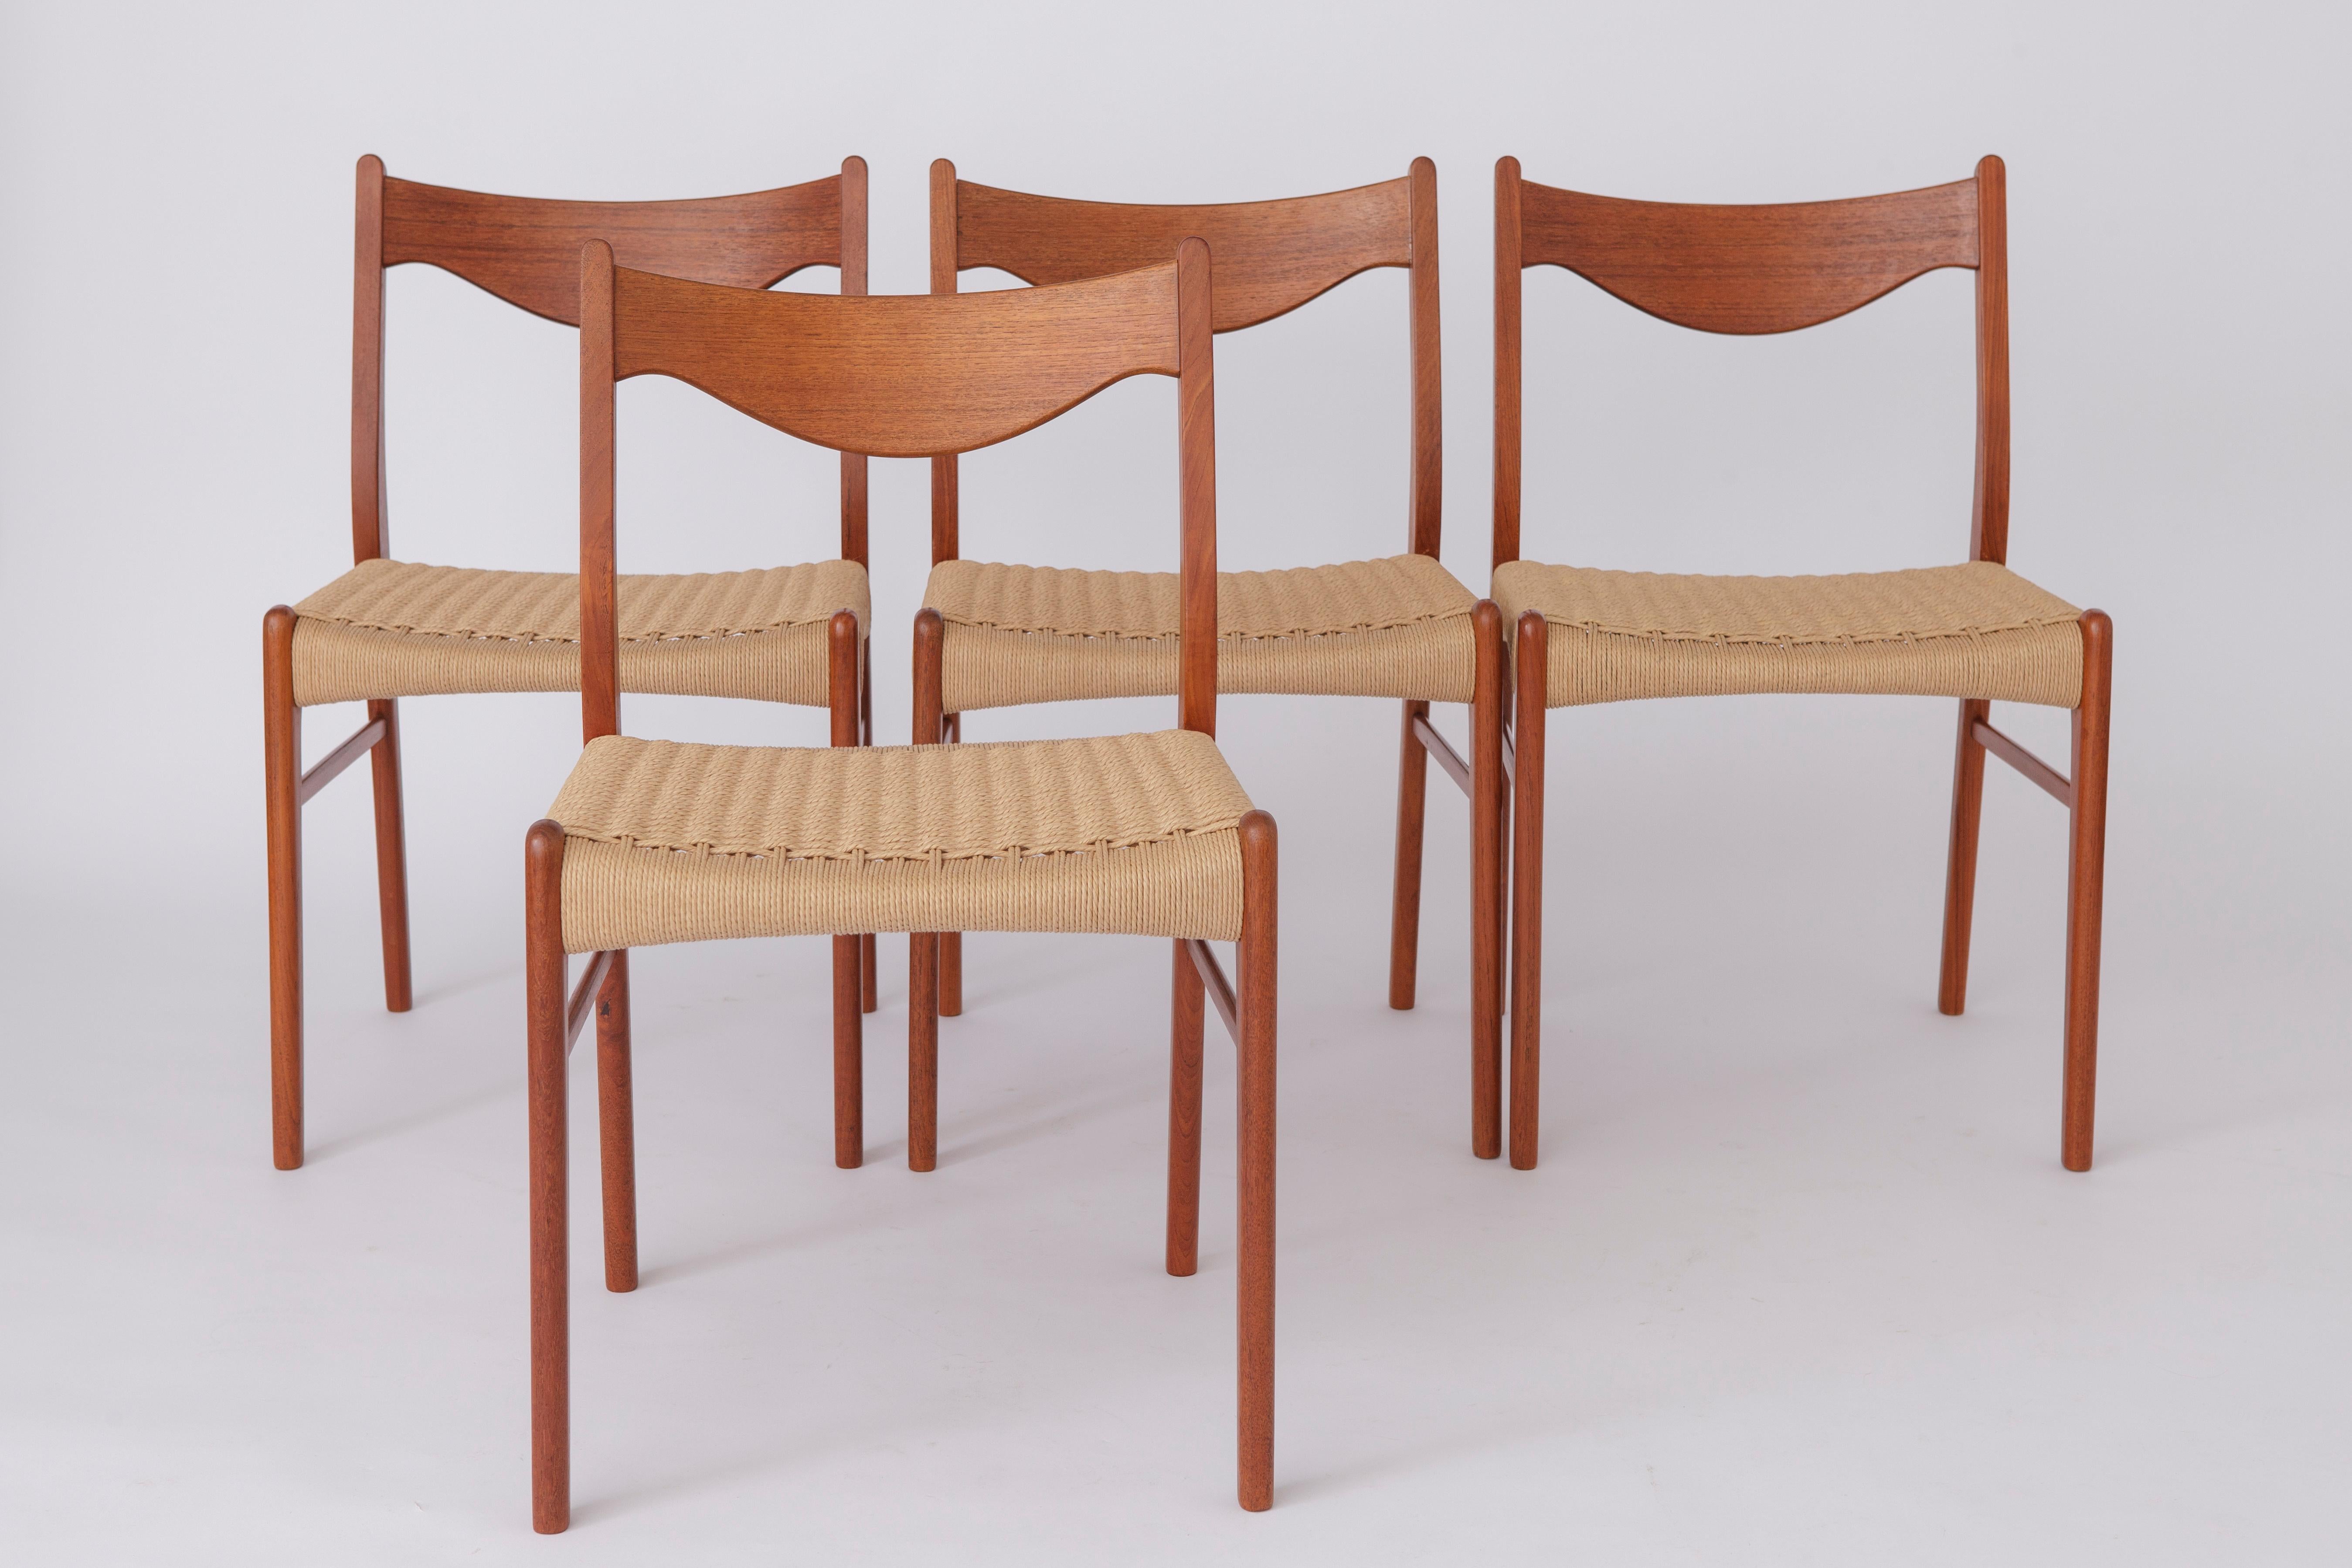 Set of 4 chairs designed by Arne Wahl Iversen for the manufacturer Glyngøre Stolefabrik in the 1960s.